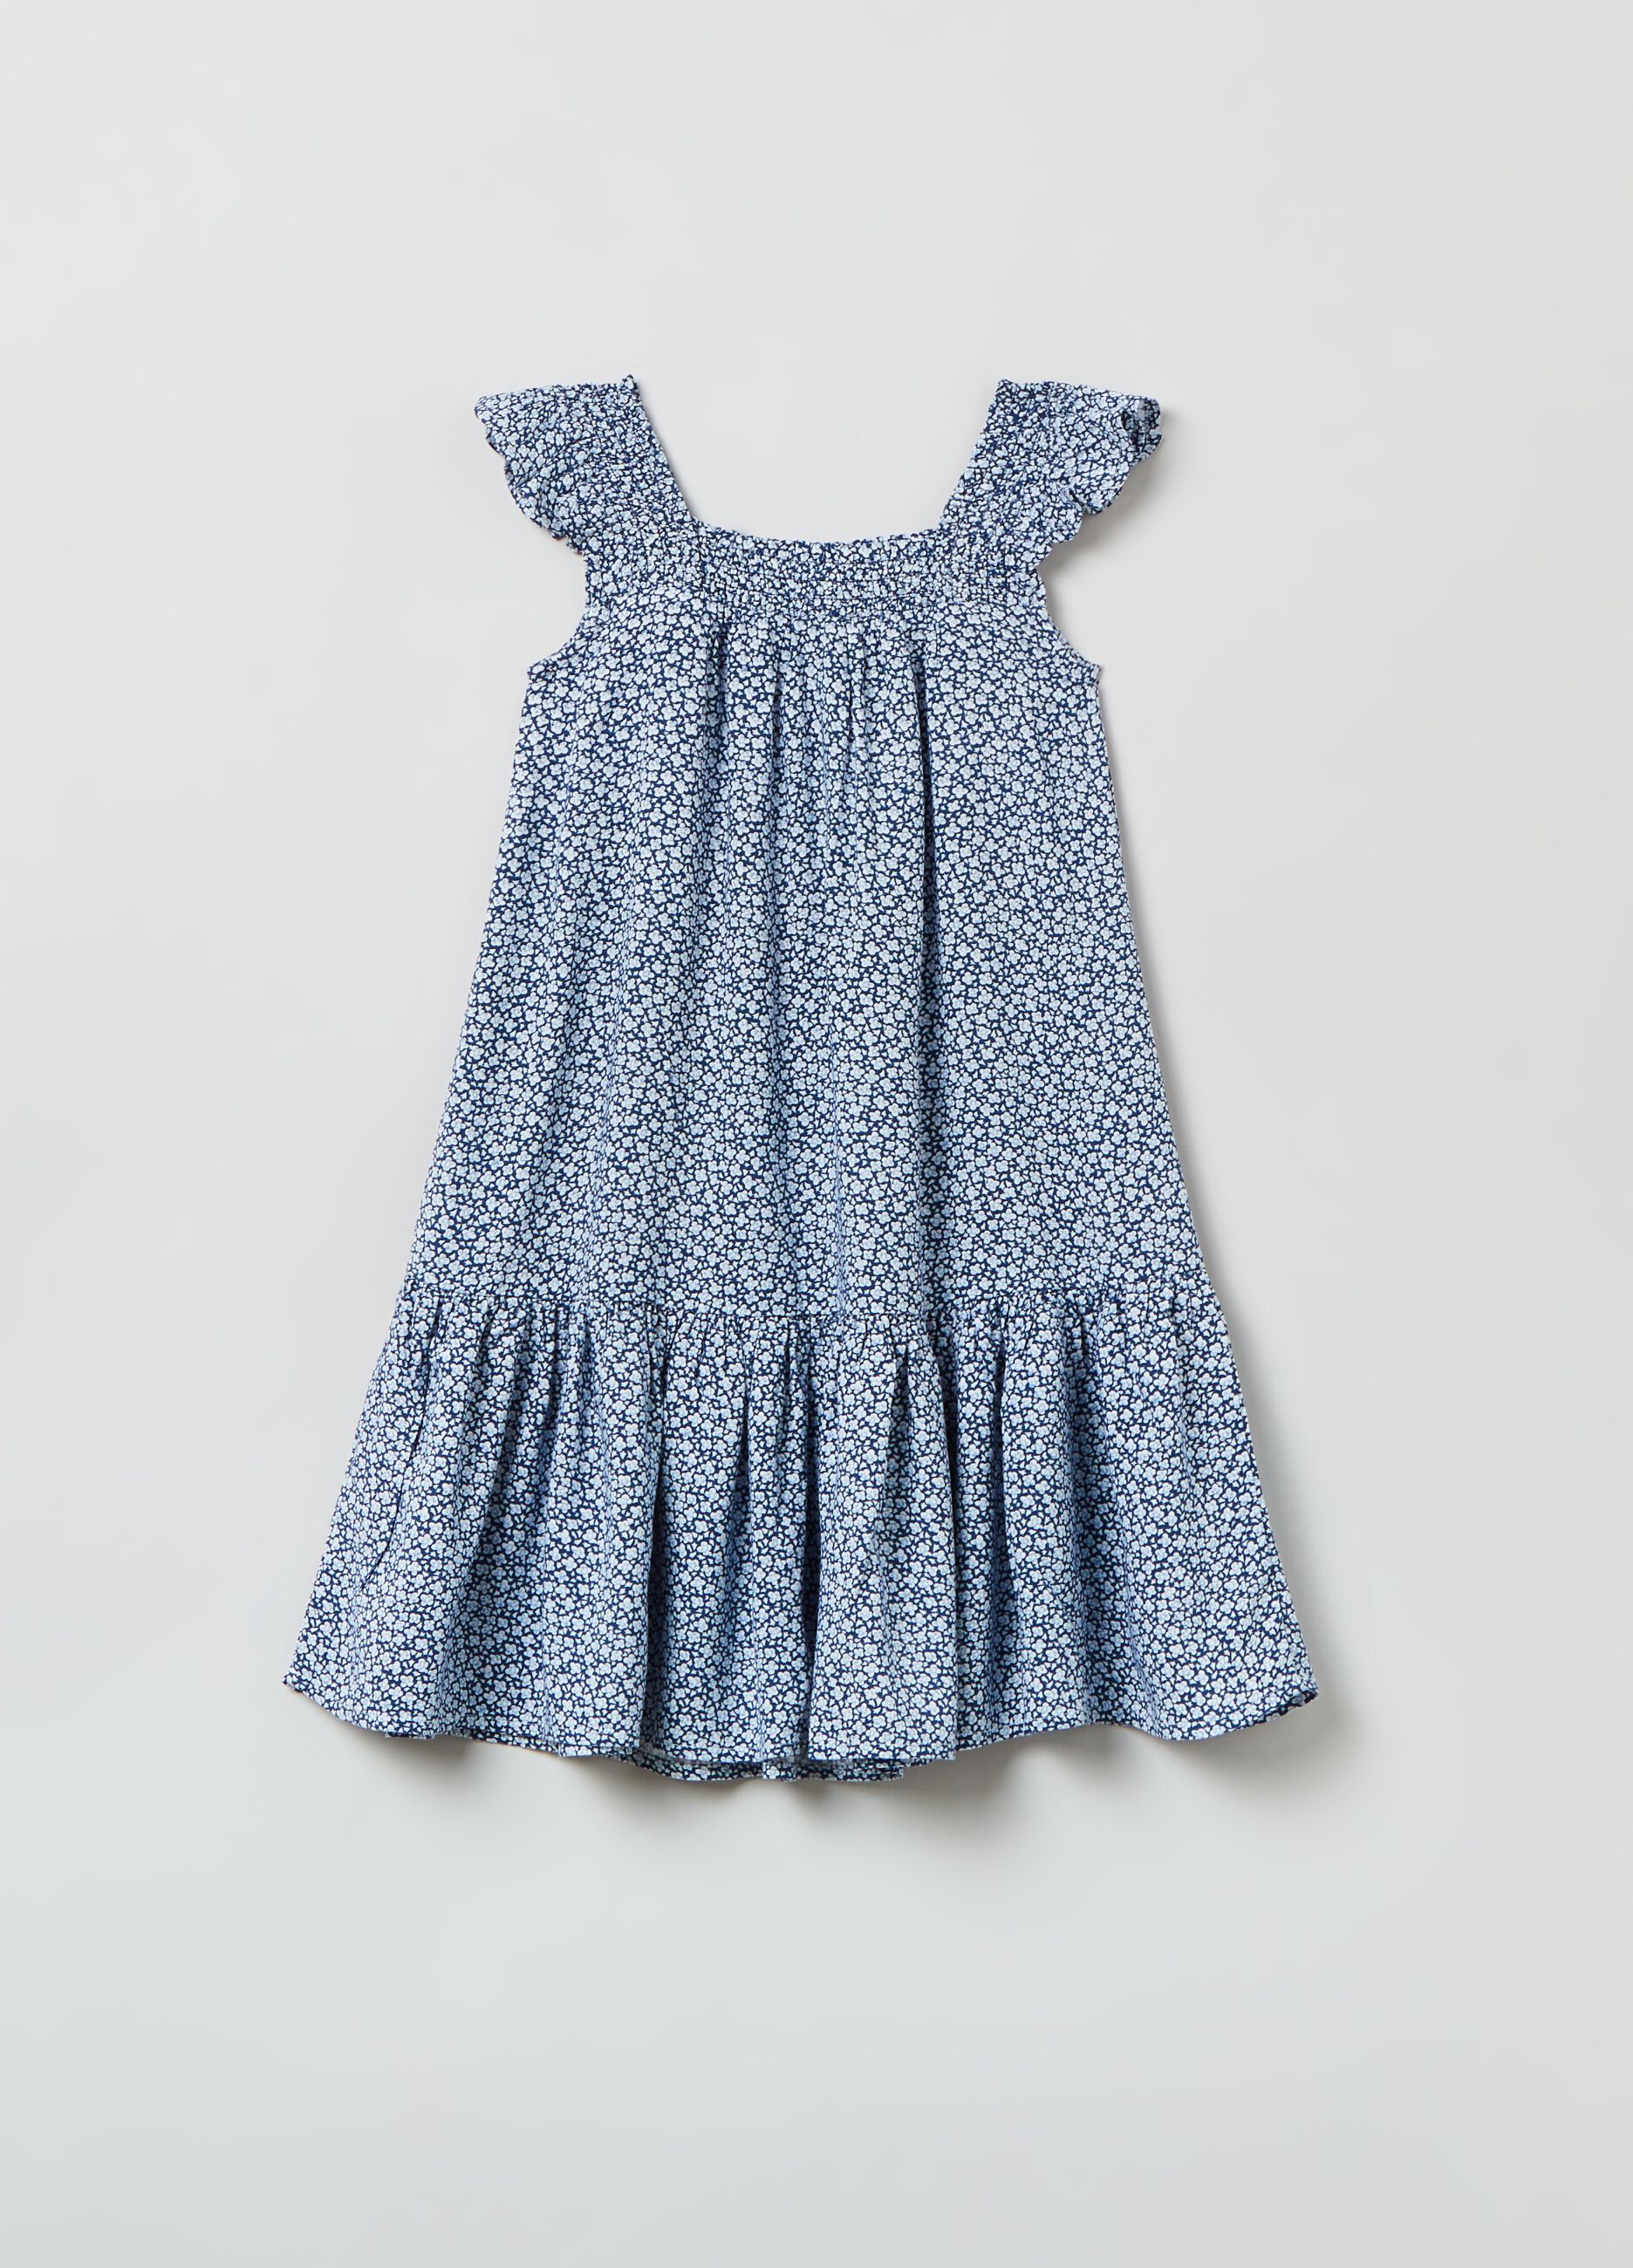 Viscose dress with small flowers print